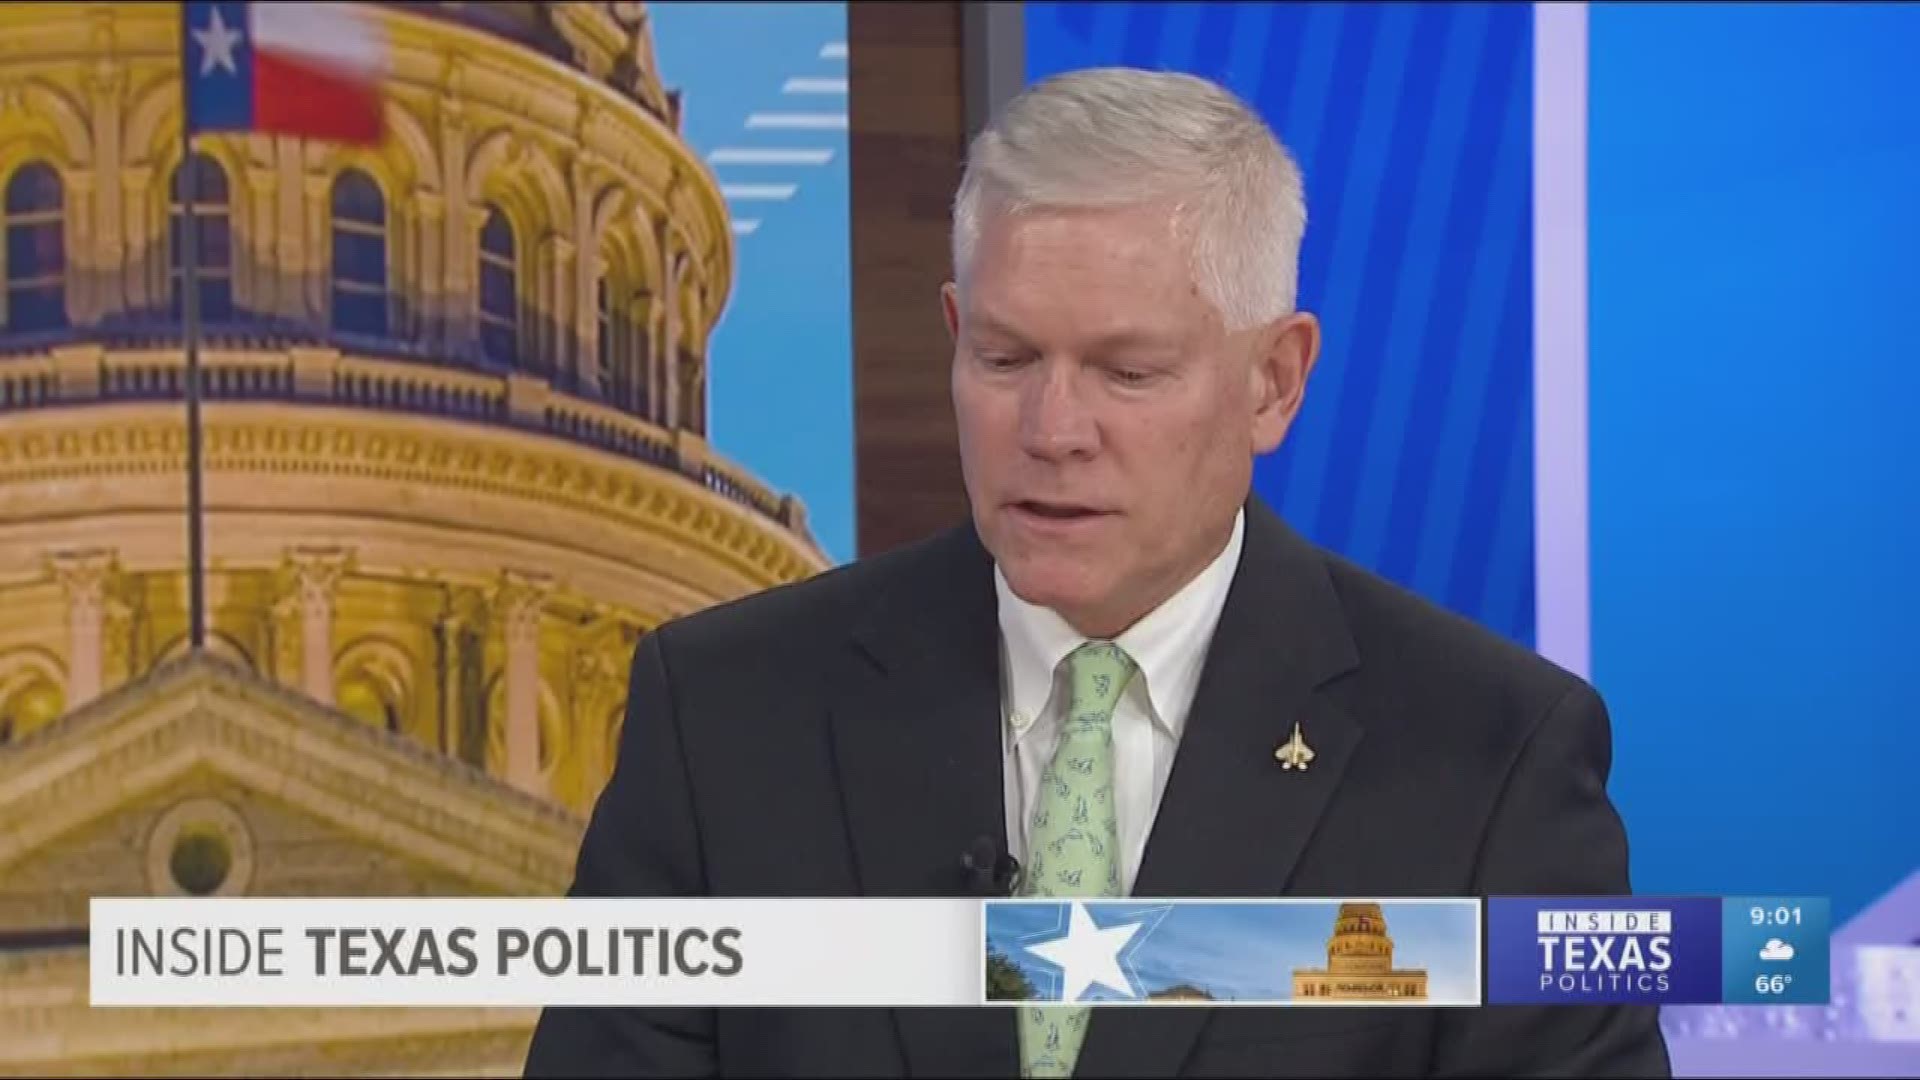 Inside Texas Politics began with the race for Texas Congressional District 32, the most competitive race in North Texas. In his re-election bid, incumbent U.S. Rep. Pete sessions is facing a tough challenge from Democrat Colin Allred. Both Rep. Sessions a